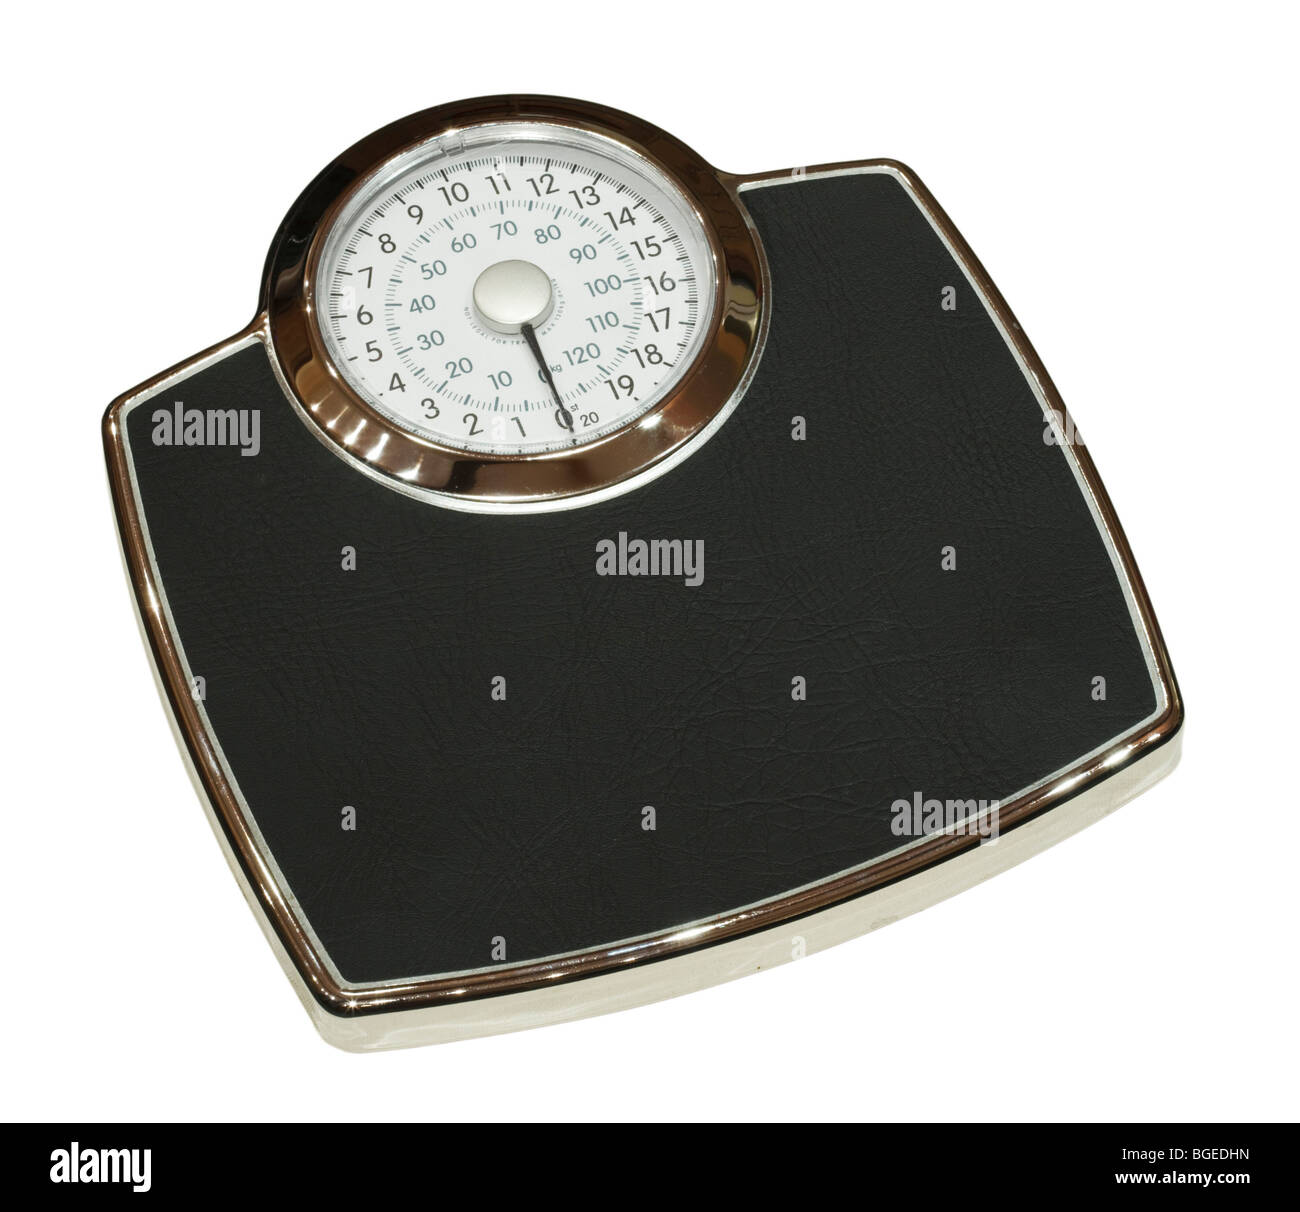 Analogue bathroom weighing scales isolated on a white background with clipping path Stock Photo